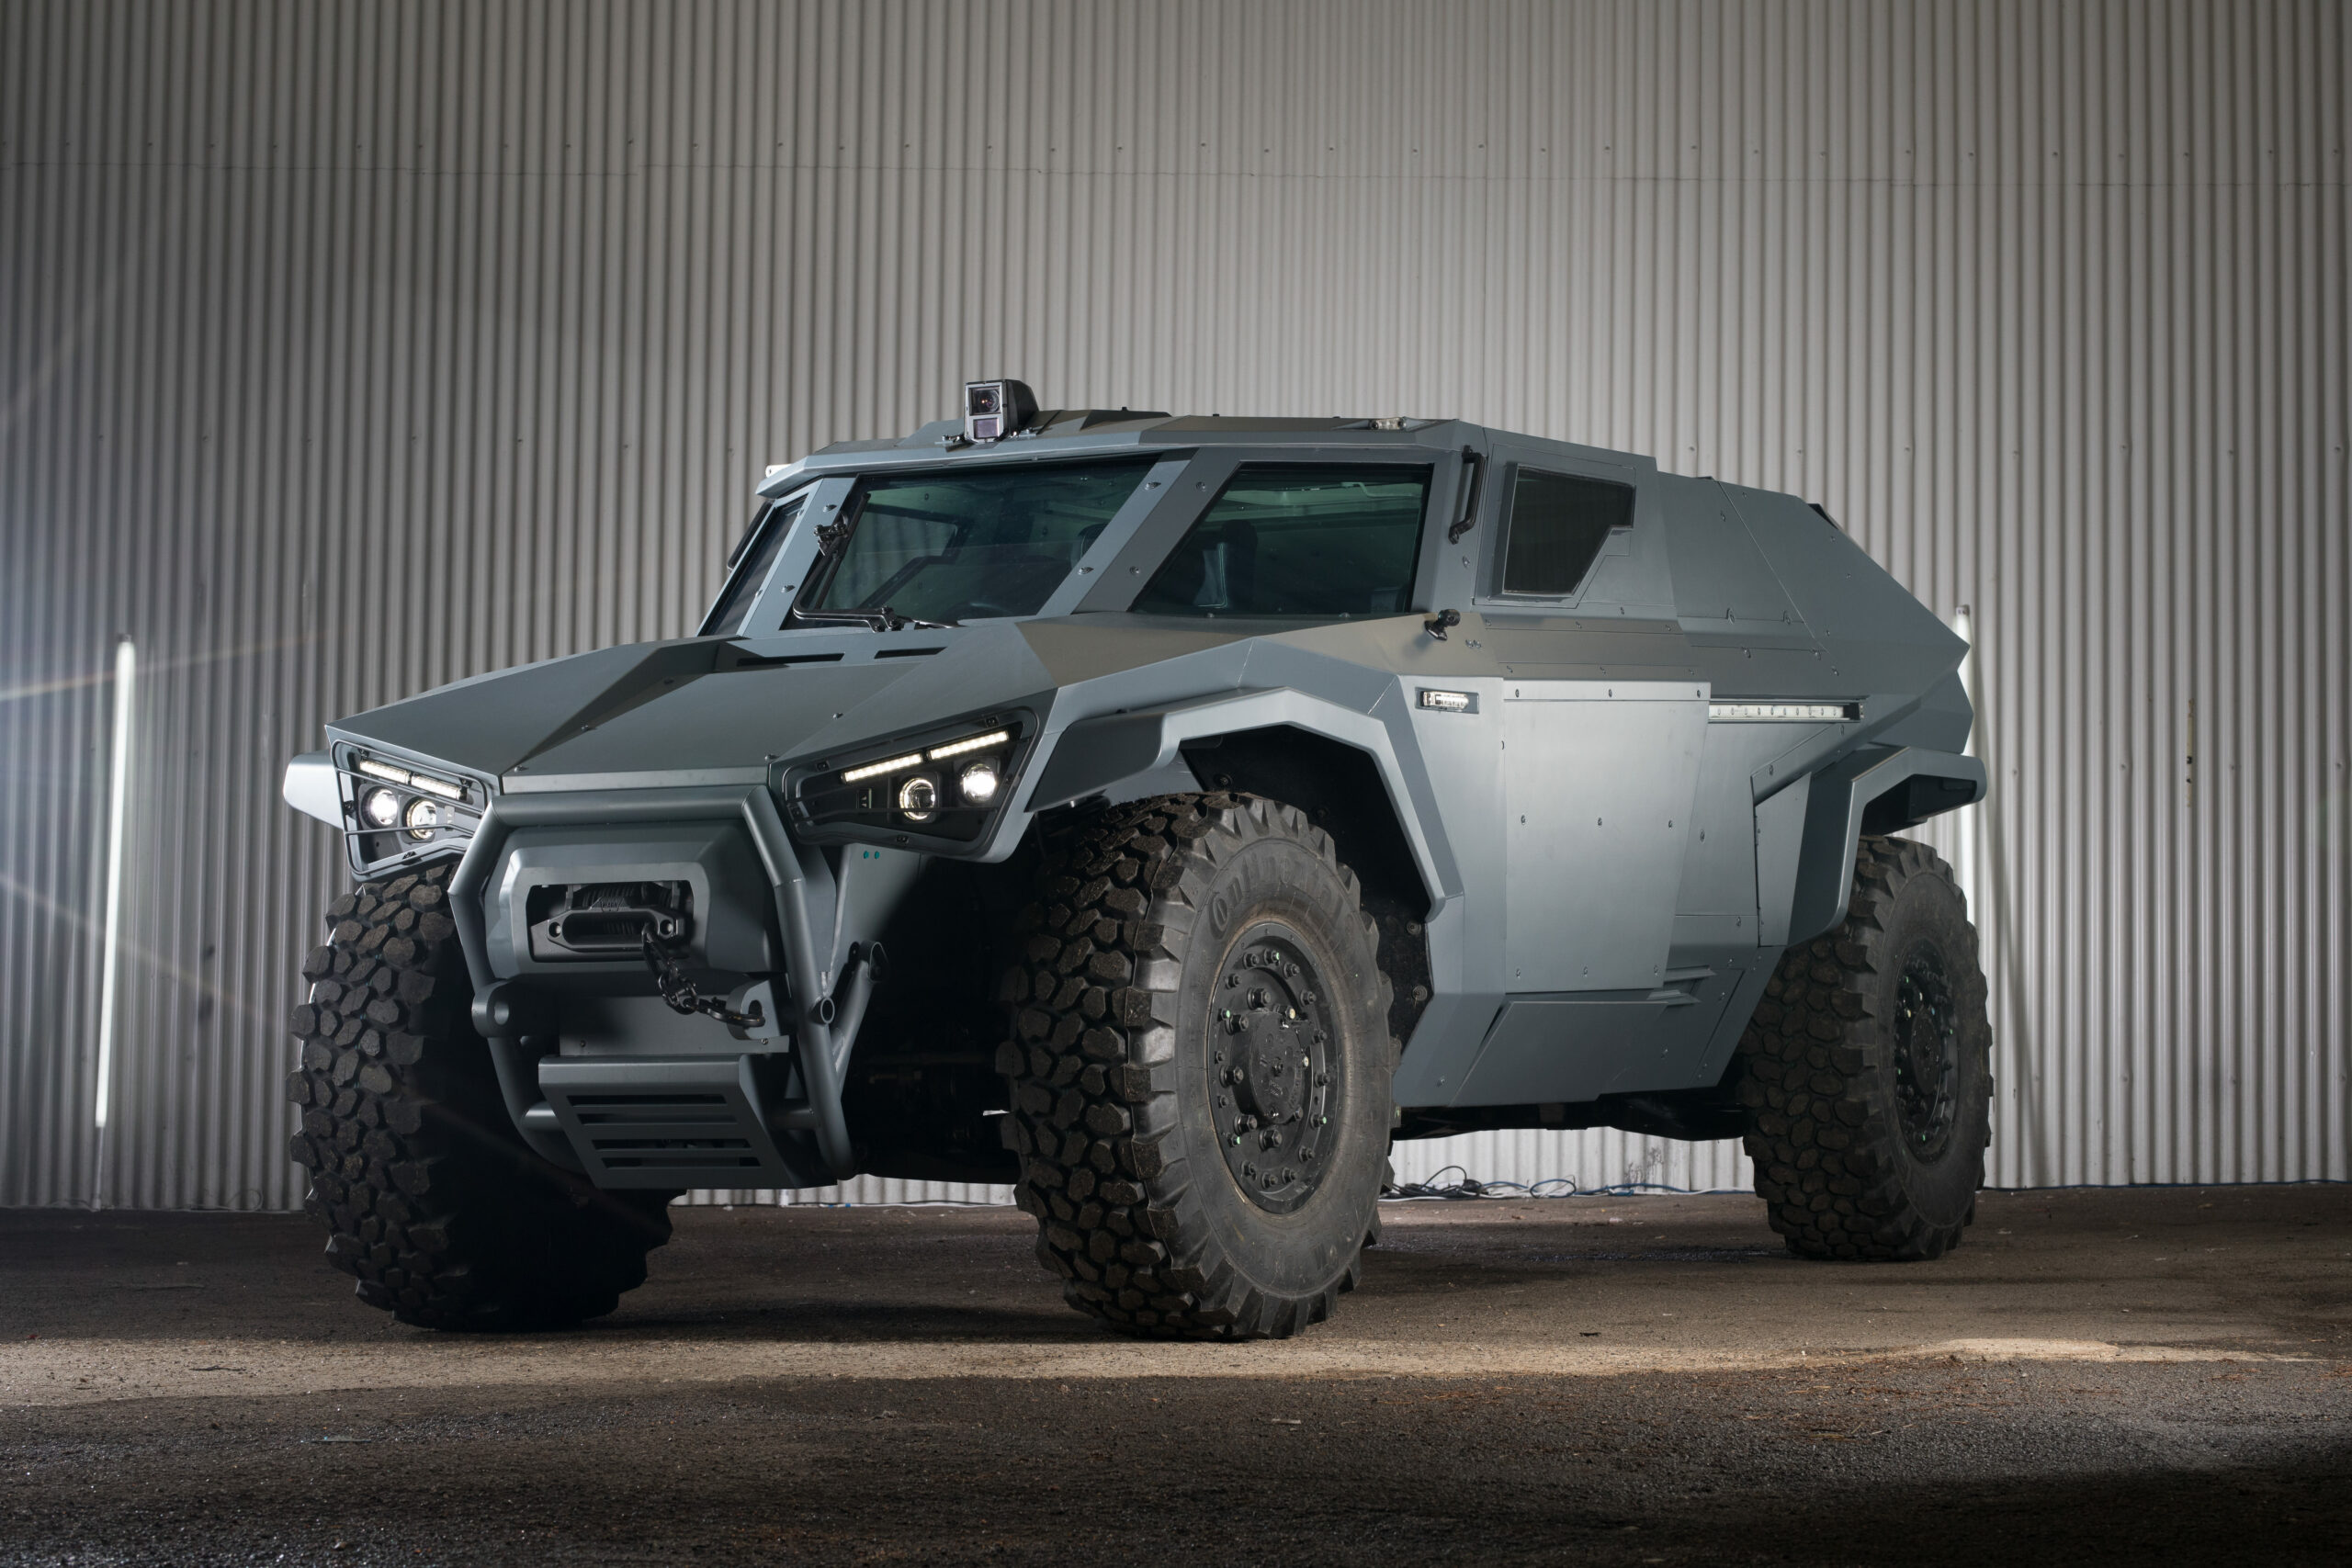 Volvo Groups New Military Vehicle Can Drive Sideways Like A Crab